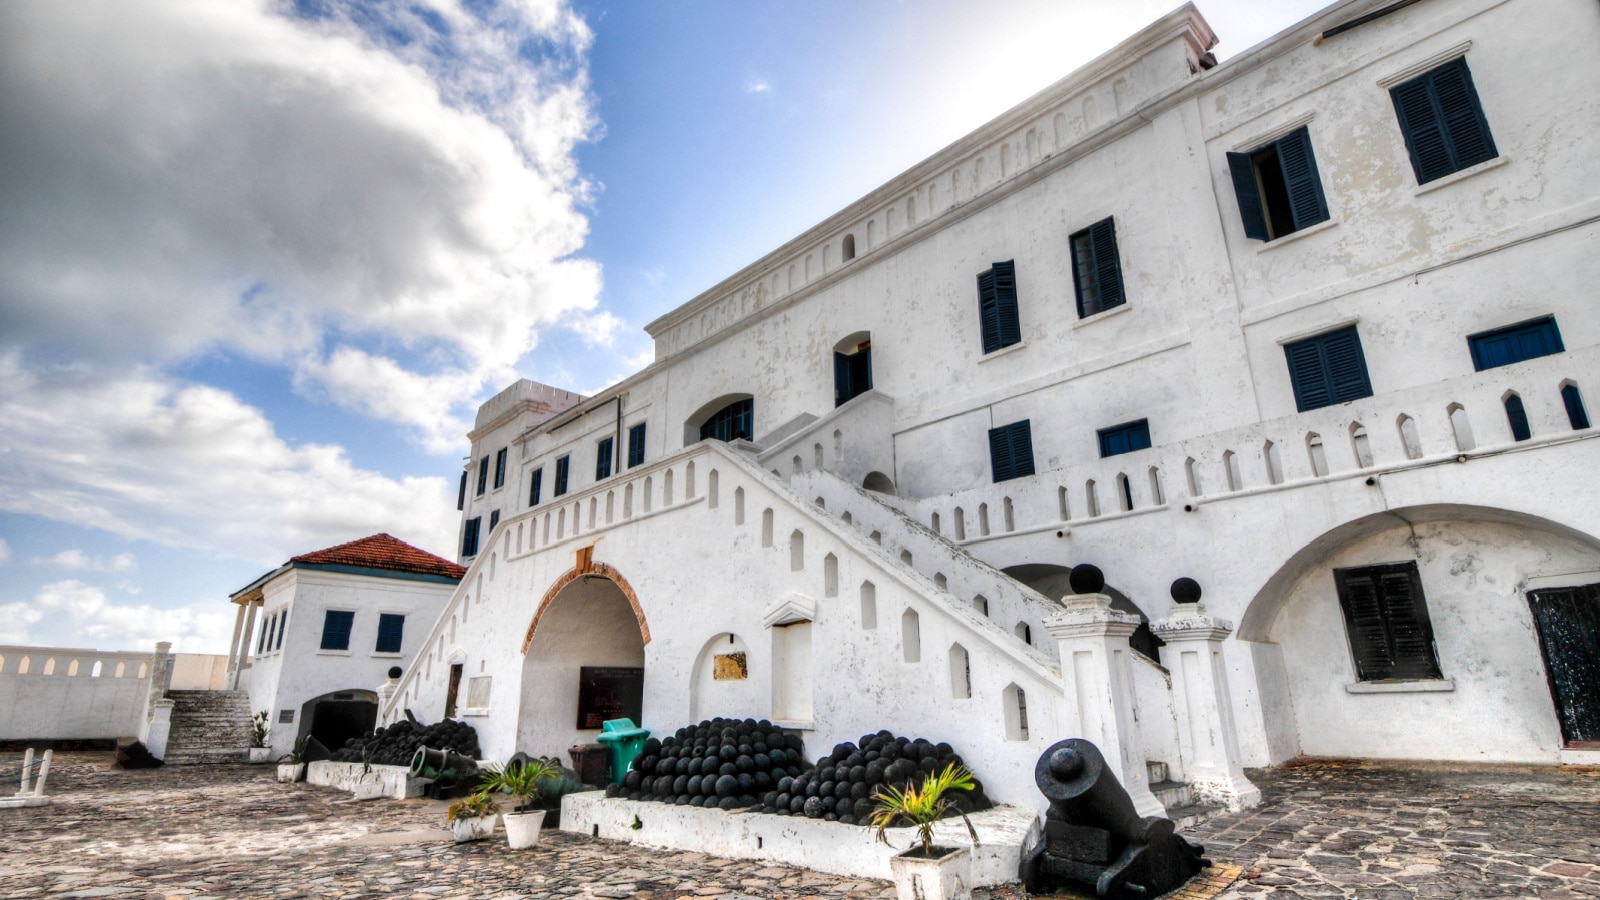 Cape Coast Castle is a fortification in Ghana built by Swedish traders for trade in timber and gold. Later the structure was used in the trans-Atlantic slave trade.